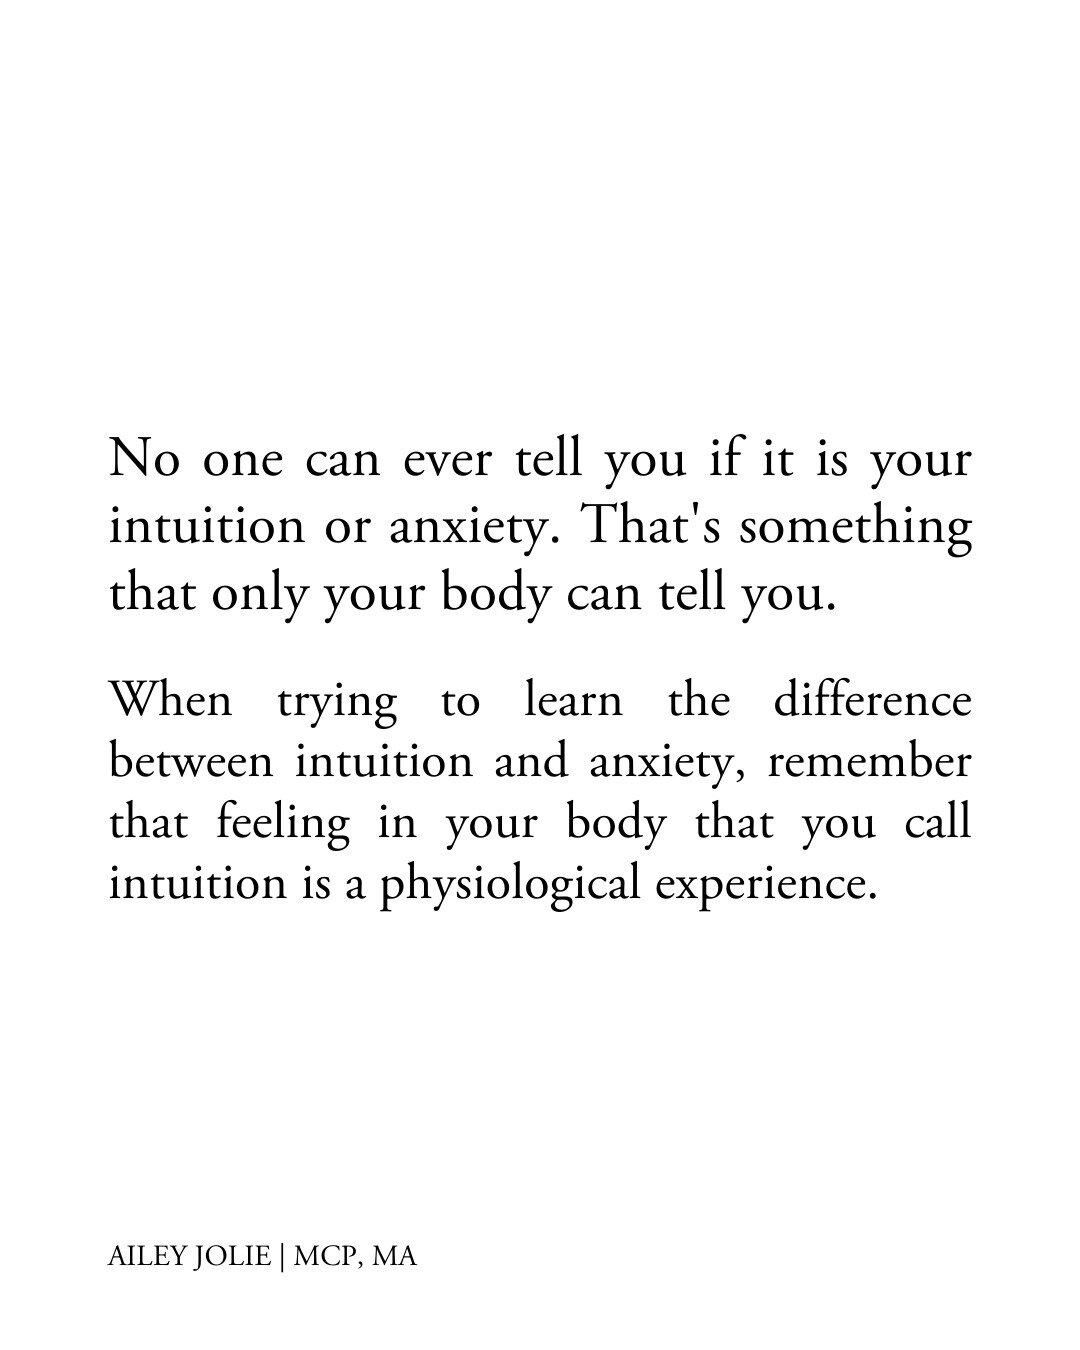 When you're trying to learn the difference between intuition and anxiety, remember that feeling in your body that you call intuition is a physiological experience.

The feeling doesn't have meaning until your mind labels it with one.

It is so import